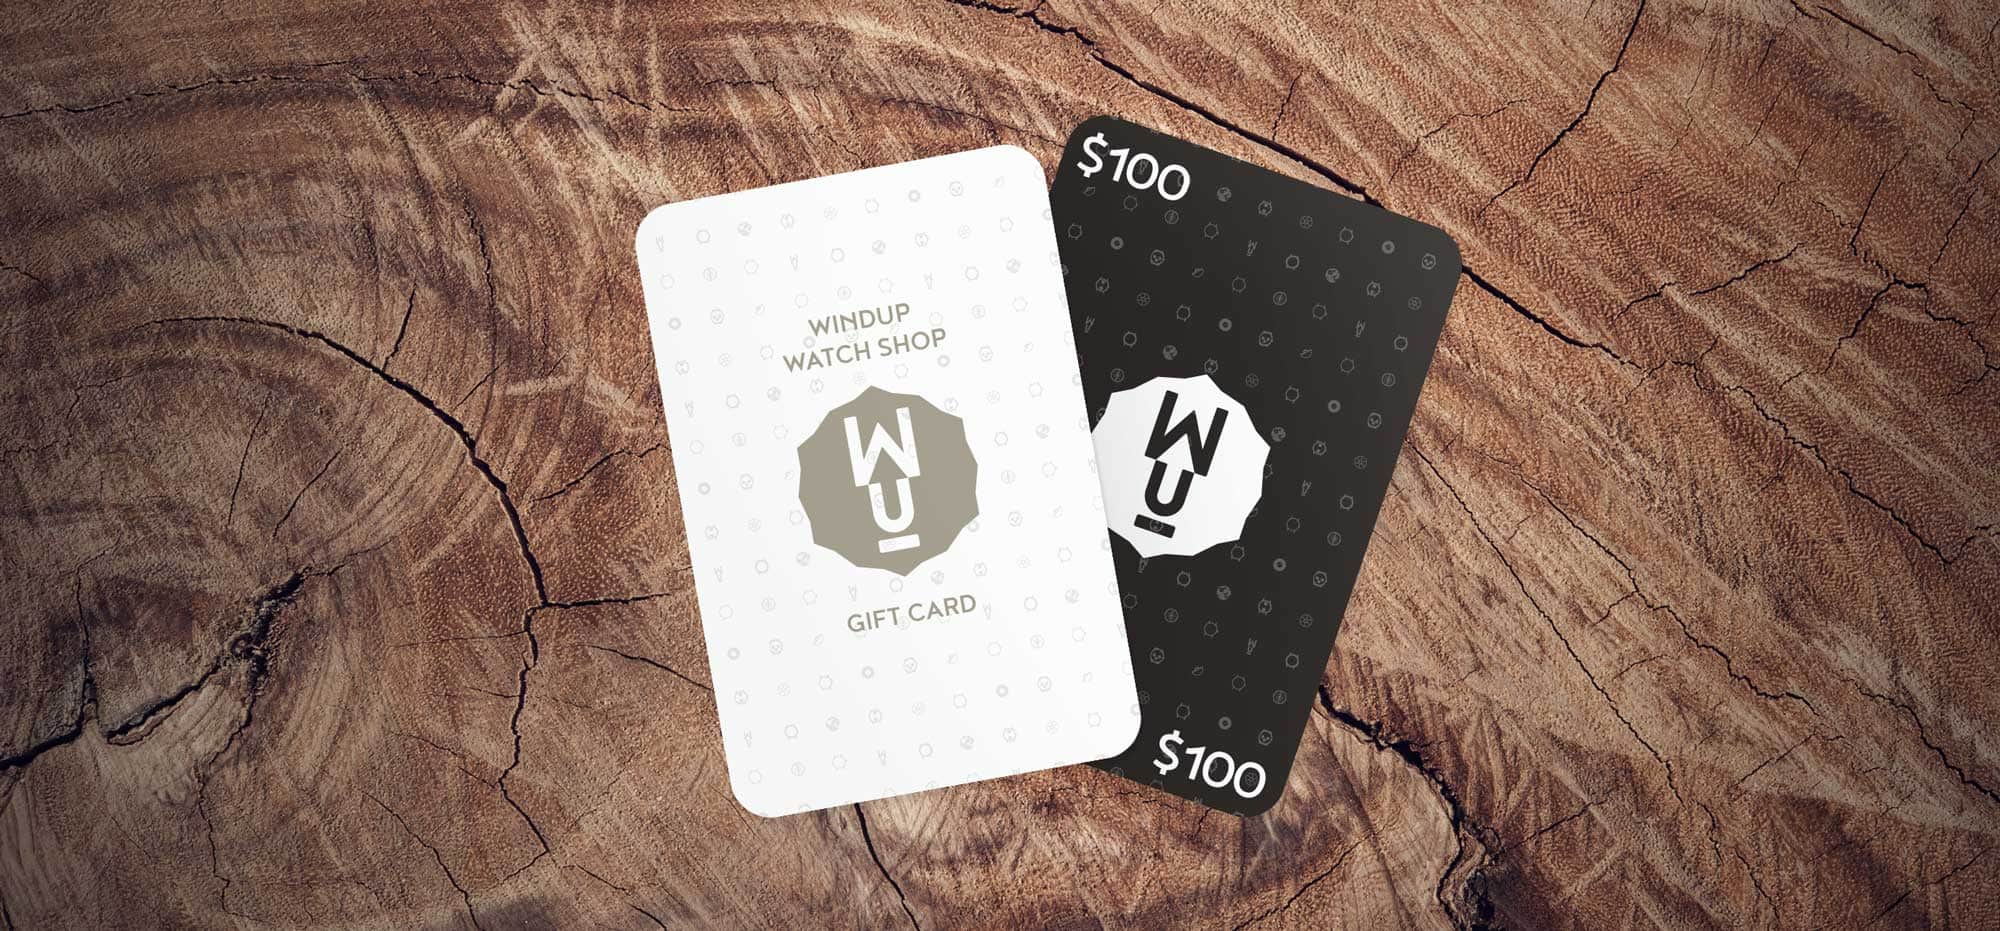 Windup Watch Shop Gift Cards Gift Card